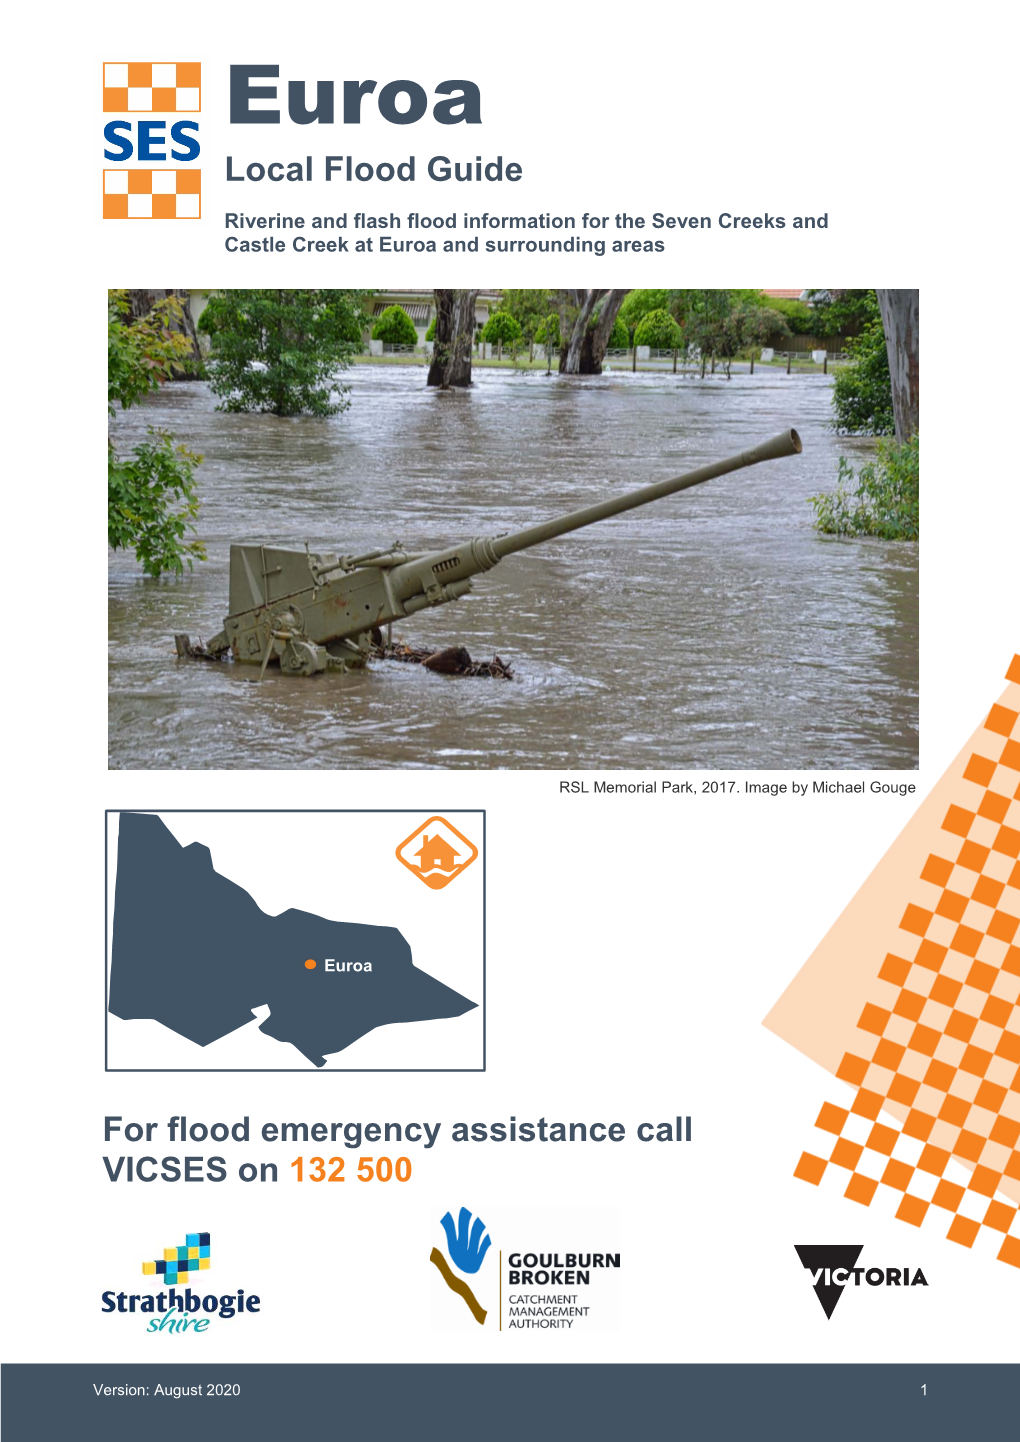 Euroa Local Flood Guide Riverine and Flash Flood Information for the Seven Creeks and Castle Creek at Euroa and Surrounding Areas